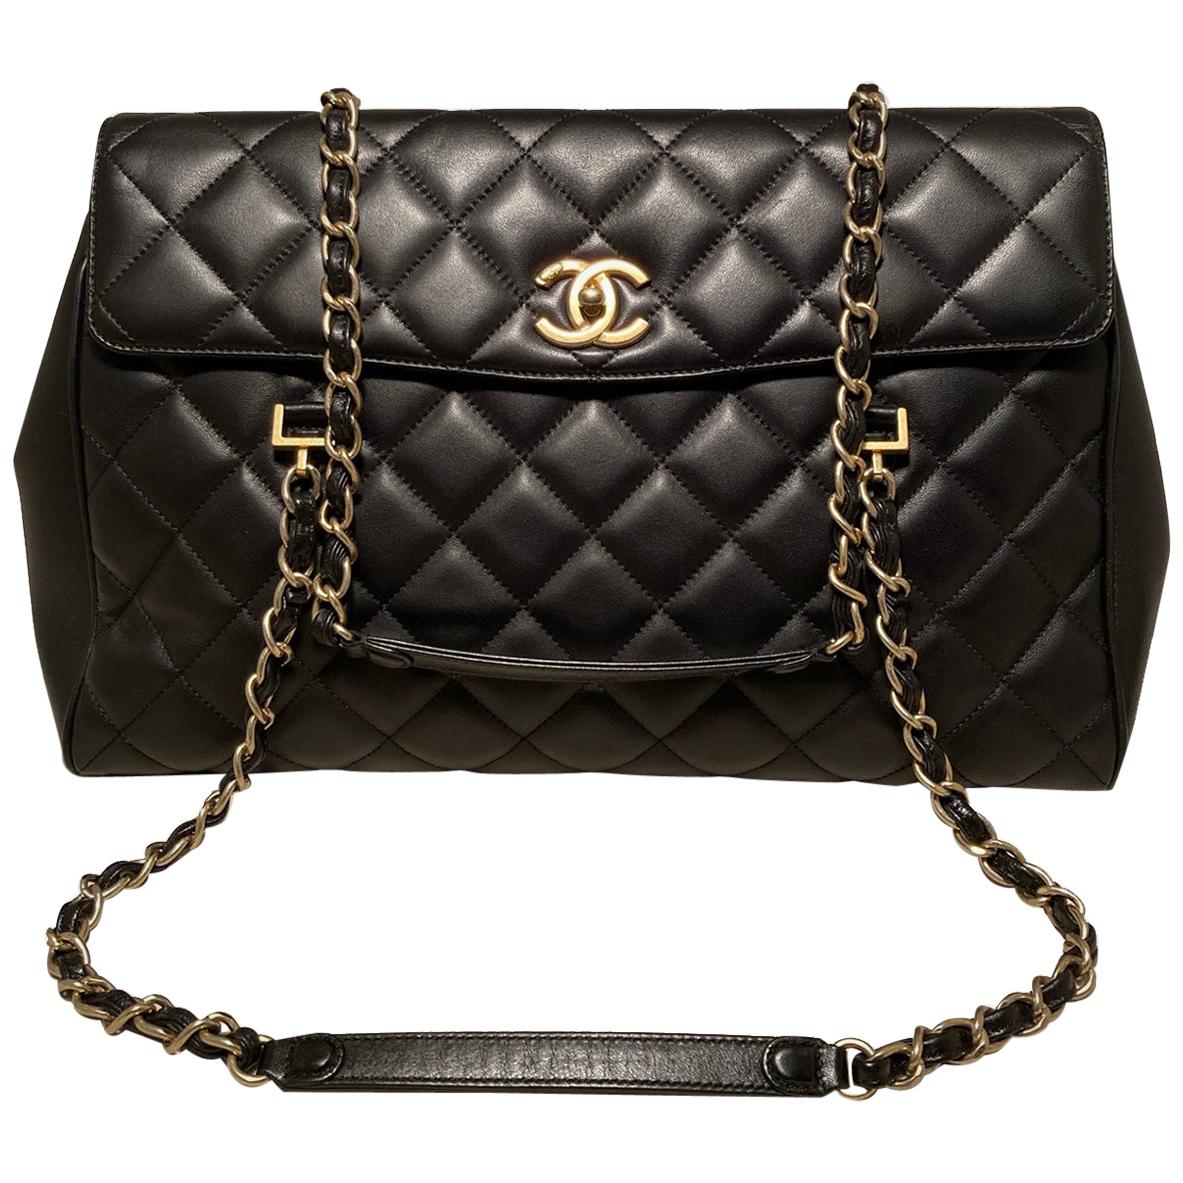 Chanel Quilted Black Leather Top Flap Double Strap Shoulder Bag Tote ...